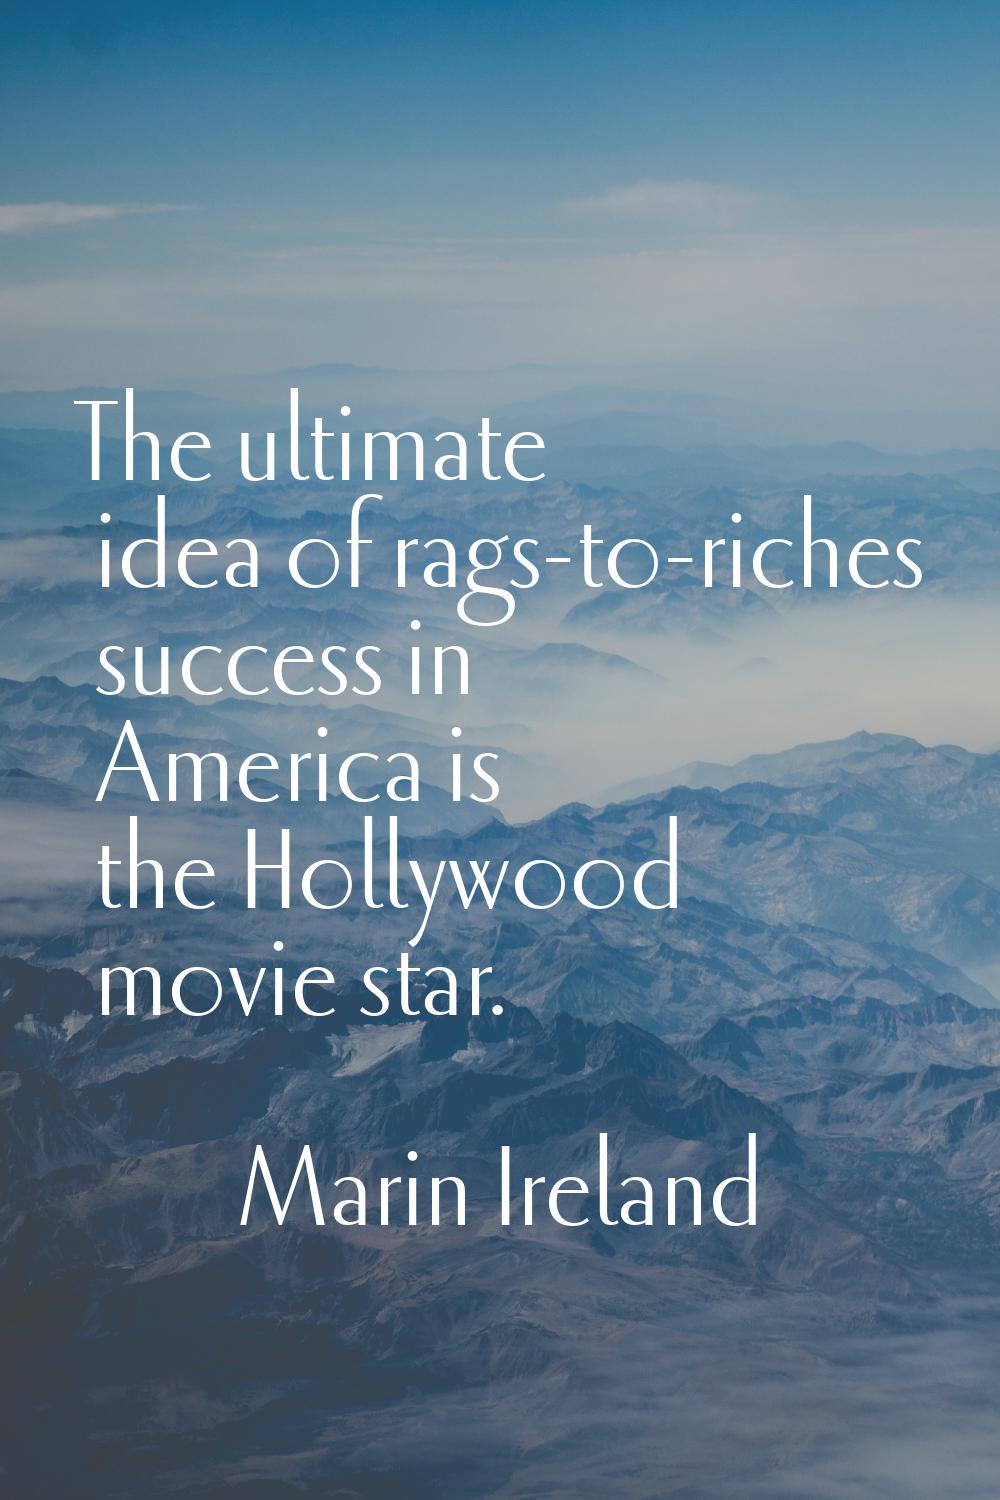 The ultimate idea of rags-to-riches success in America is the Hollywood movie star.